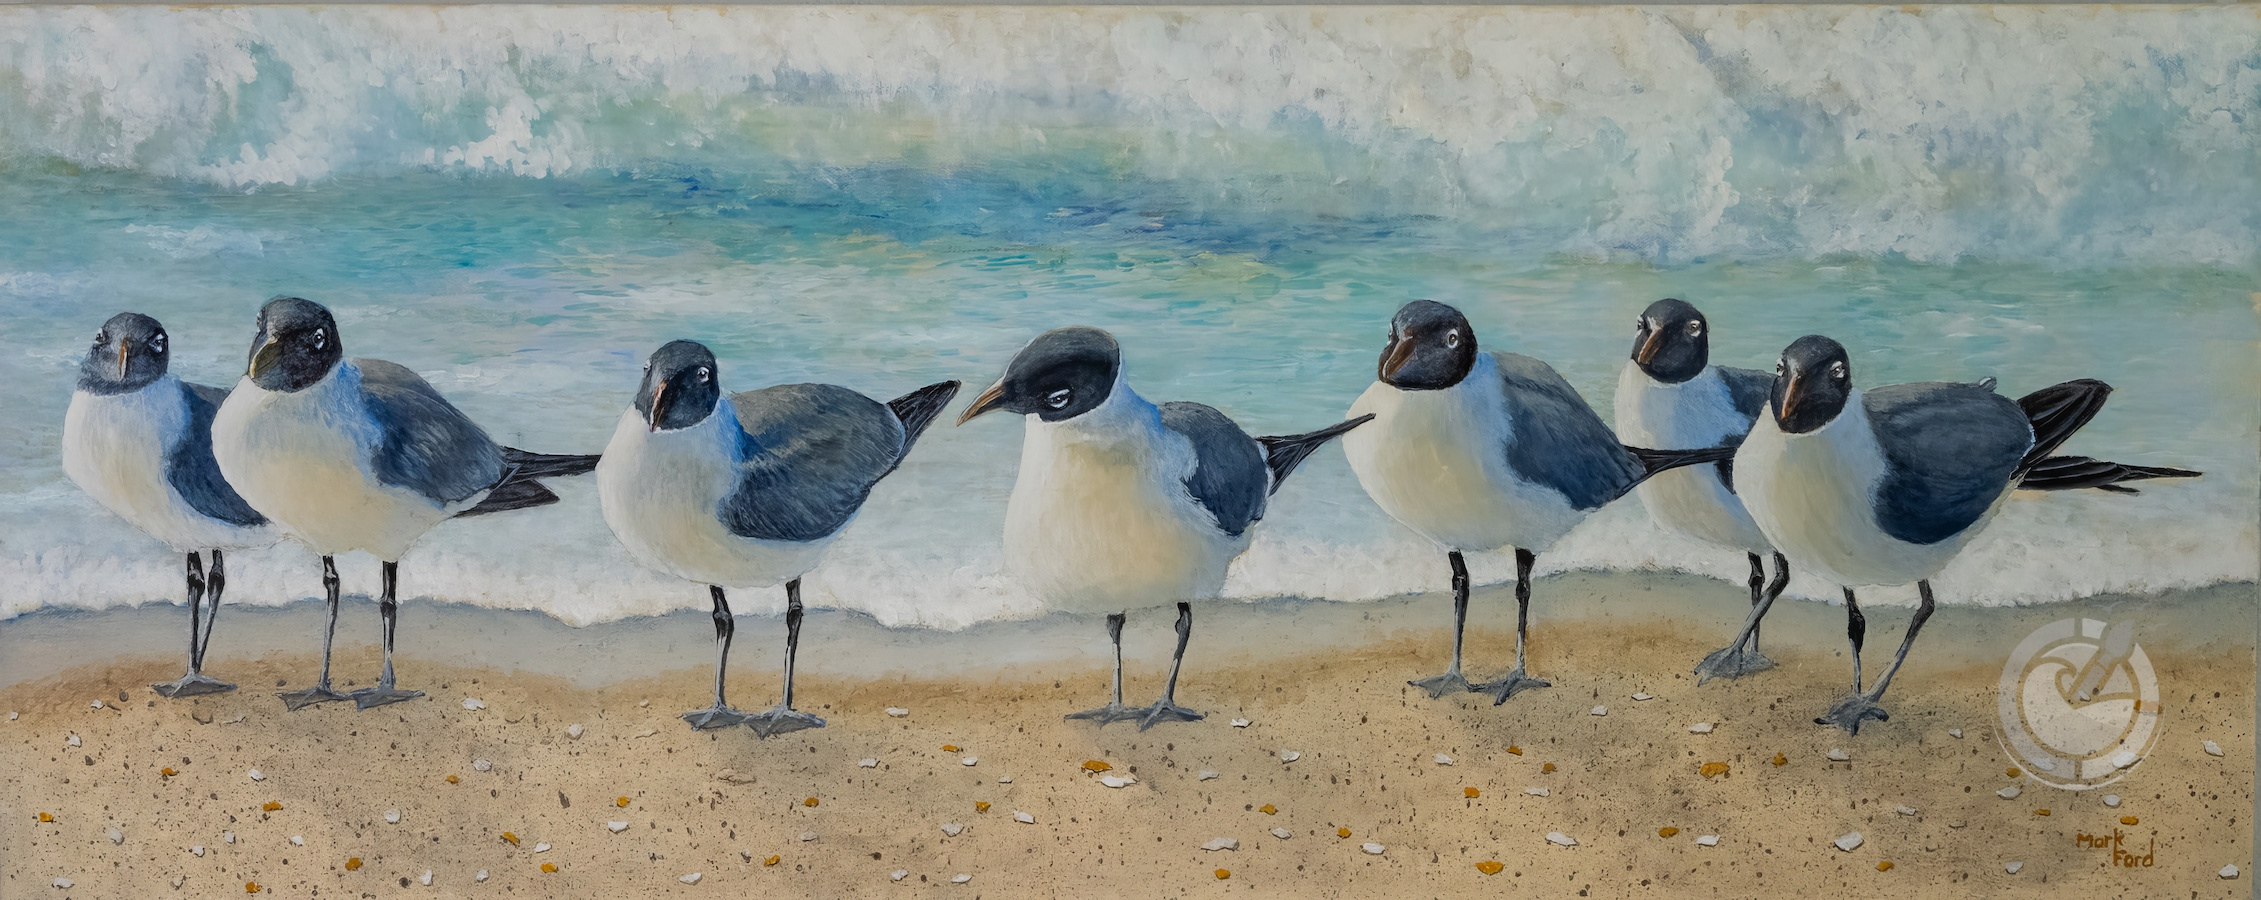 Laughing gulls are social birds often seen in flocks, both on beaches and in other coastal and inland habitats.